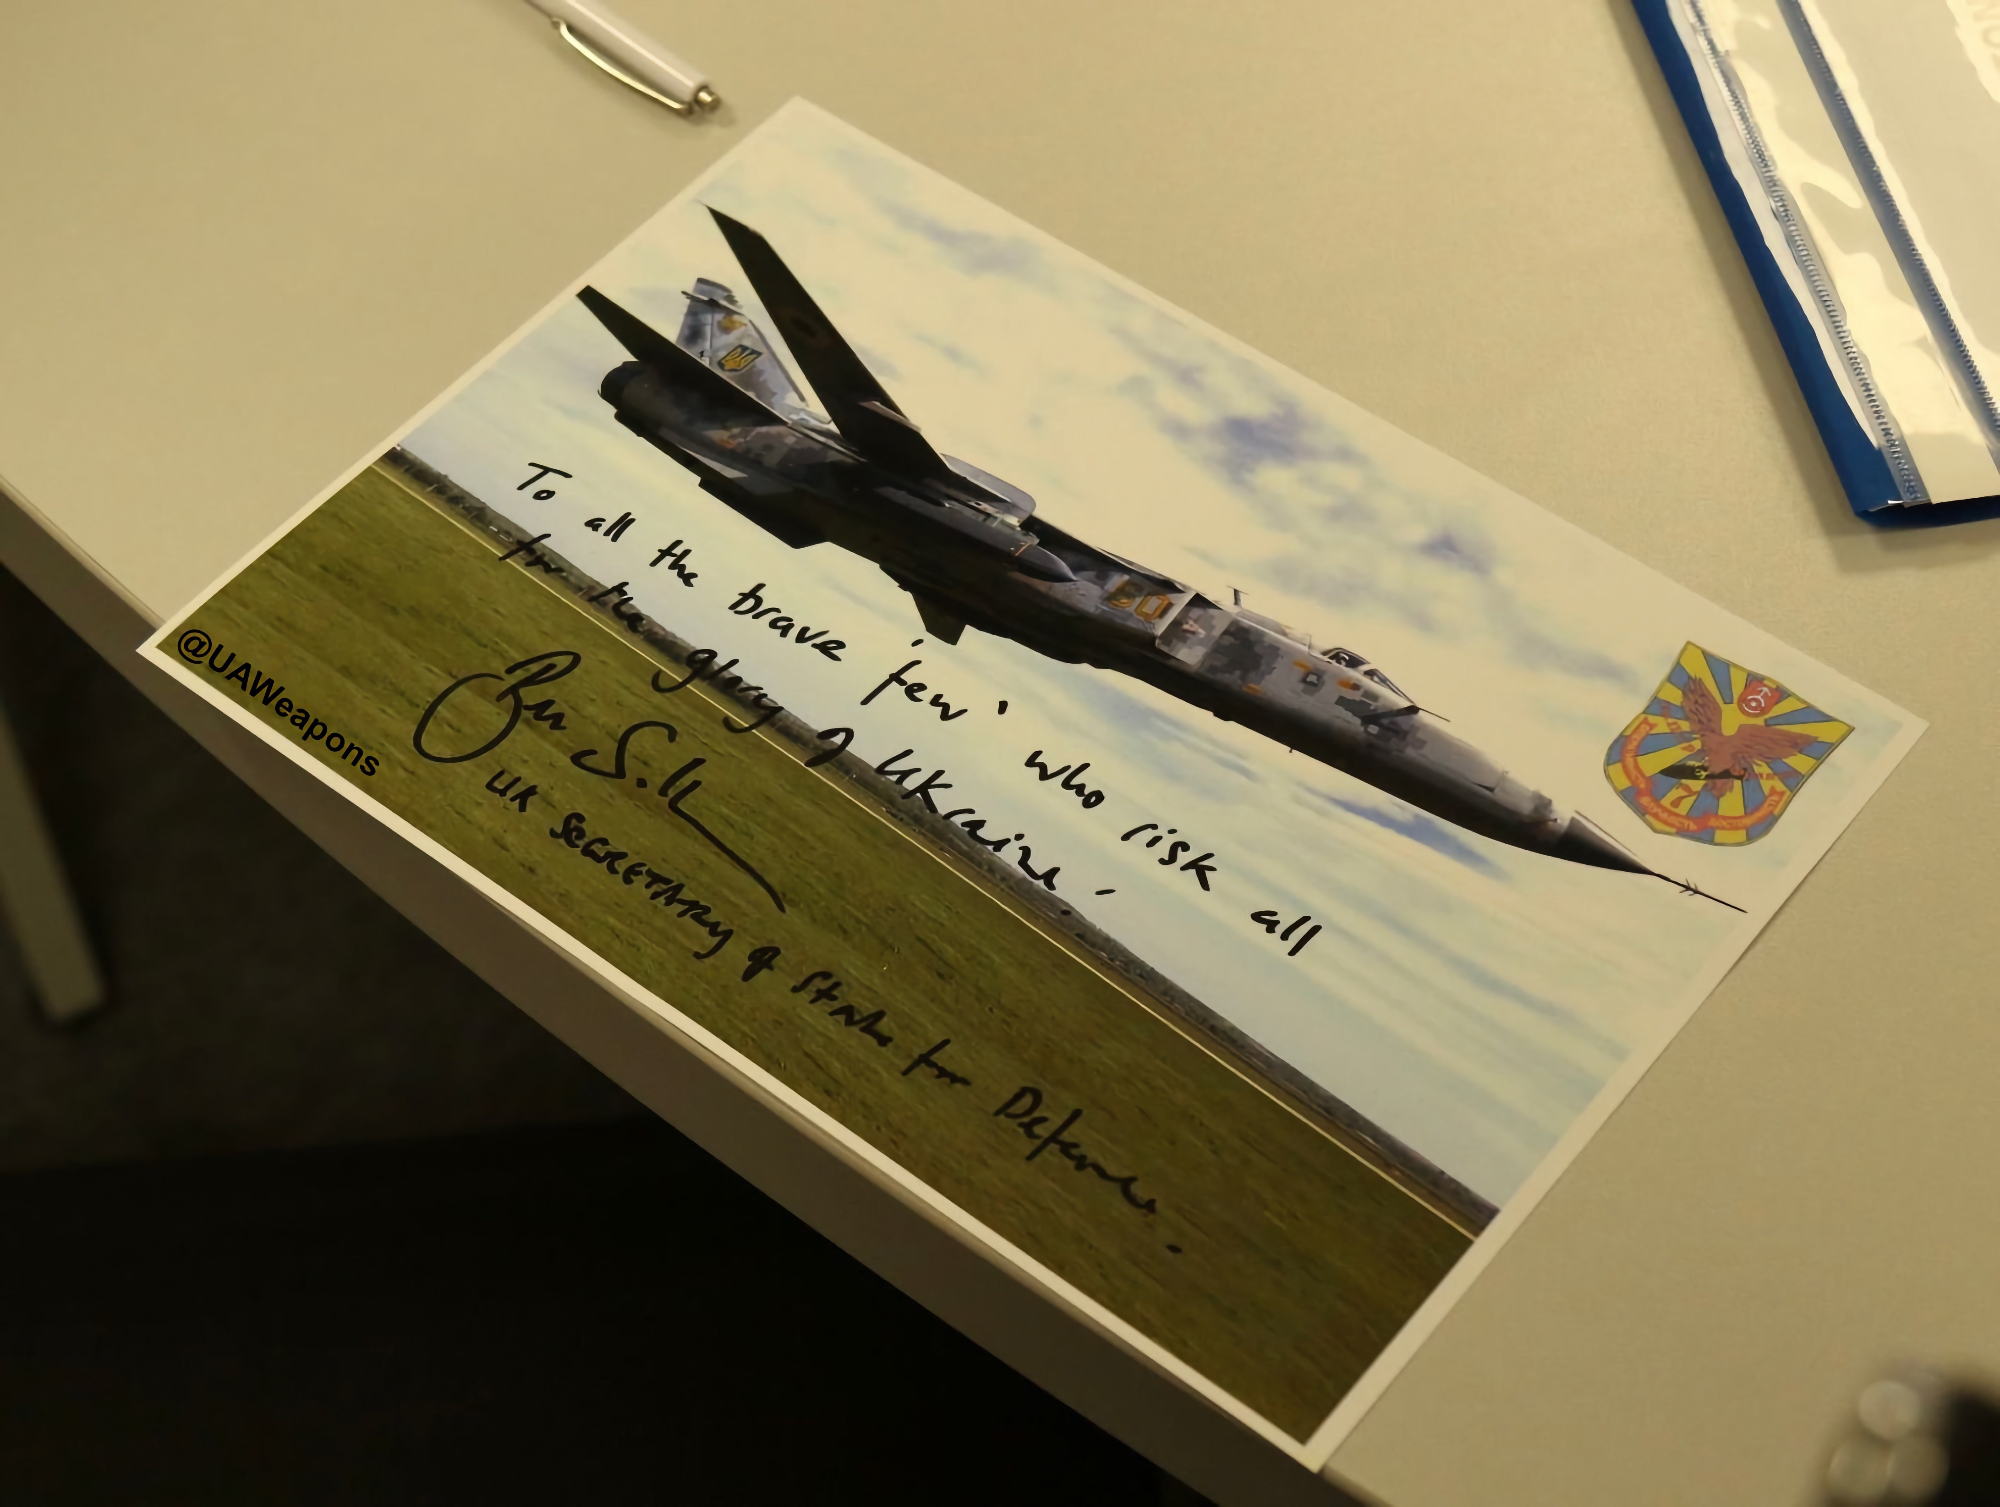 Ukrainian defence minister shows photo of Su-24 bomber with Storm Shadow cruise missile